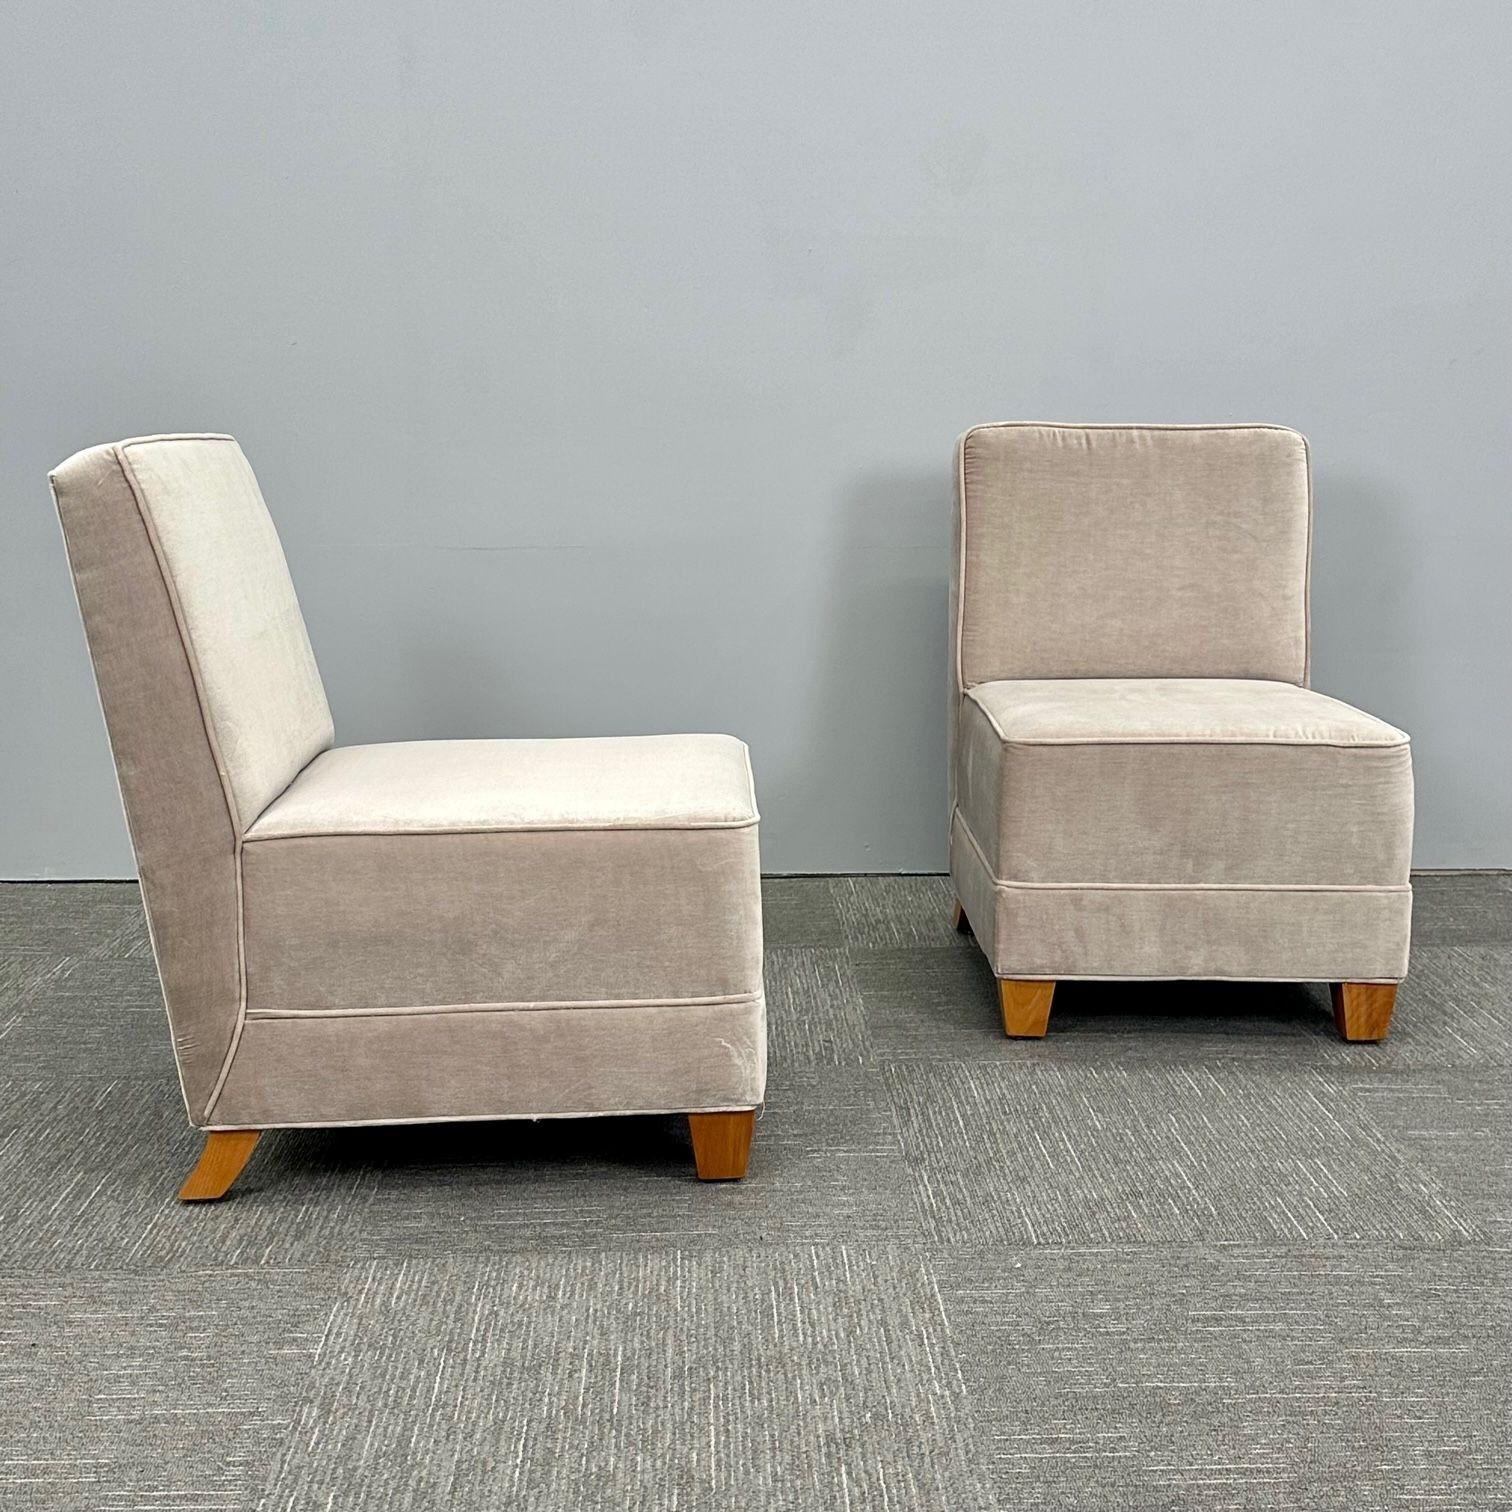 Pair Mid-Century Modern Jean-Michel Frank Style Lounge / Slipper Chairs, Mohair For Sale 3